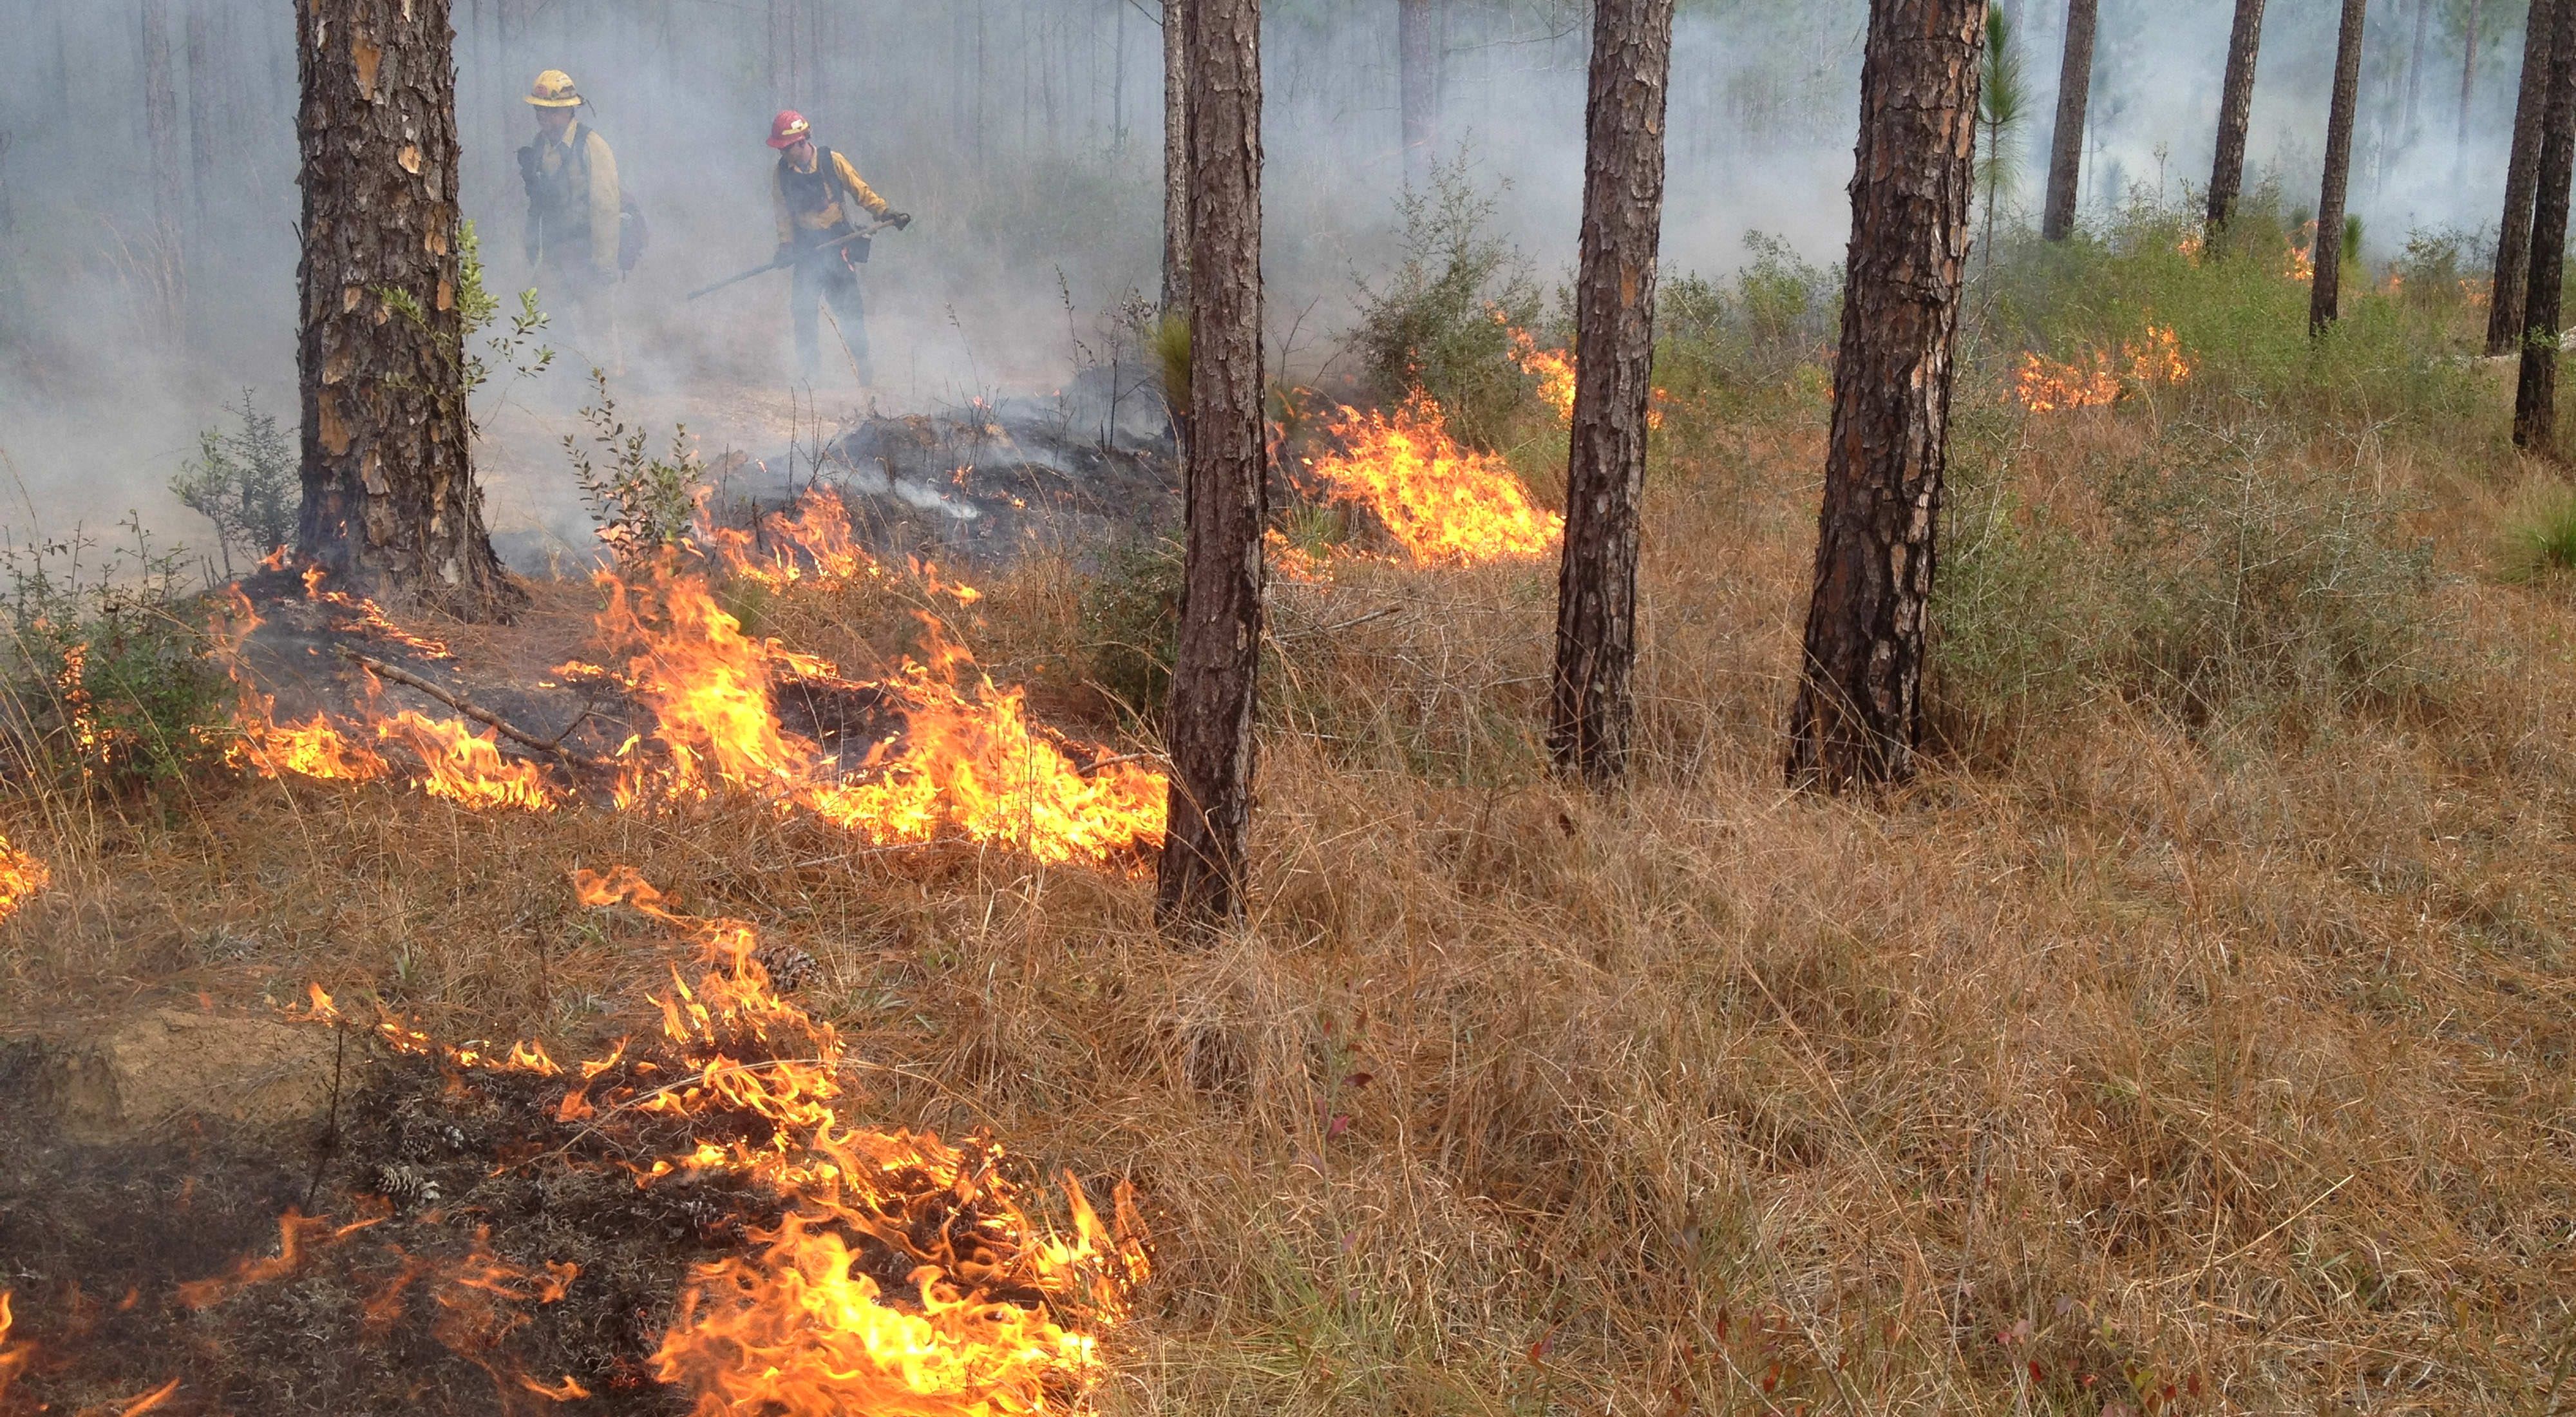 A prescribed burn at the Sweetbay Bogs Preserve